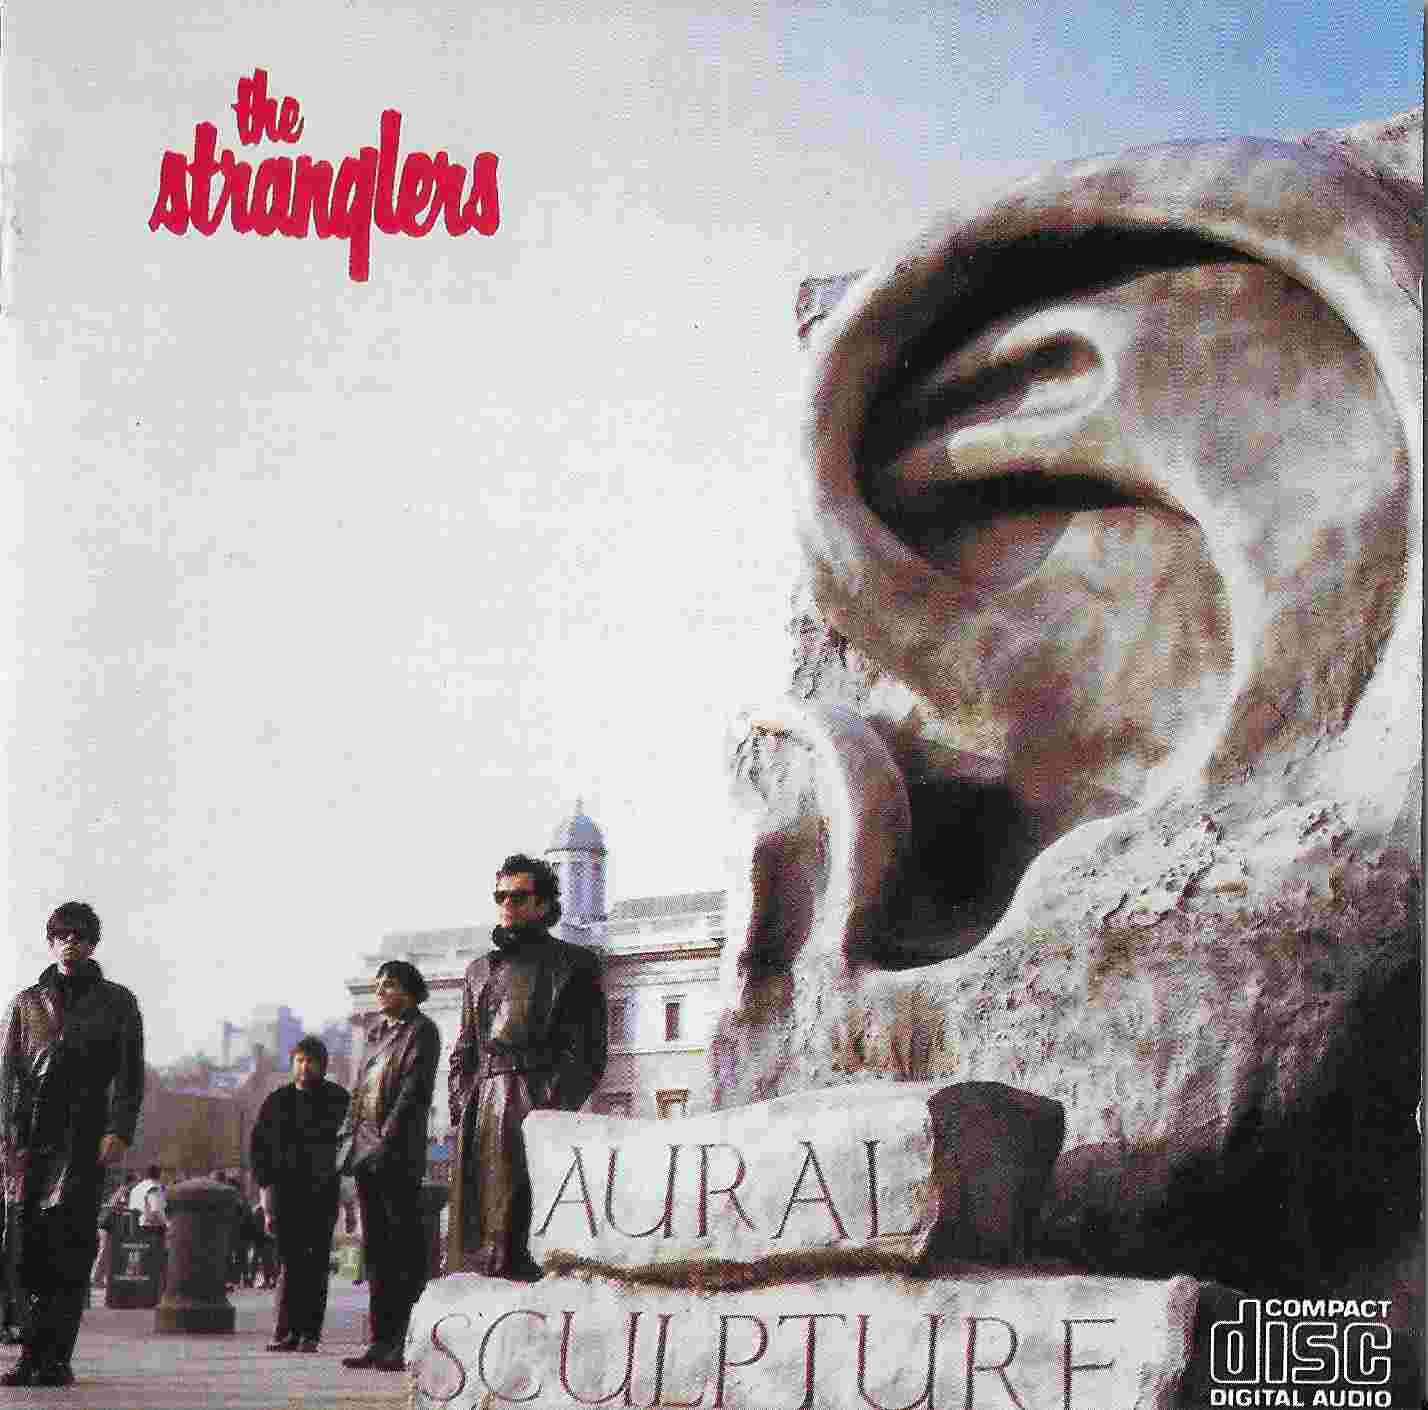 Picture of CDEPC 26220 Aural sculpture by artist The Stranglers